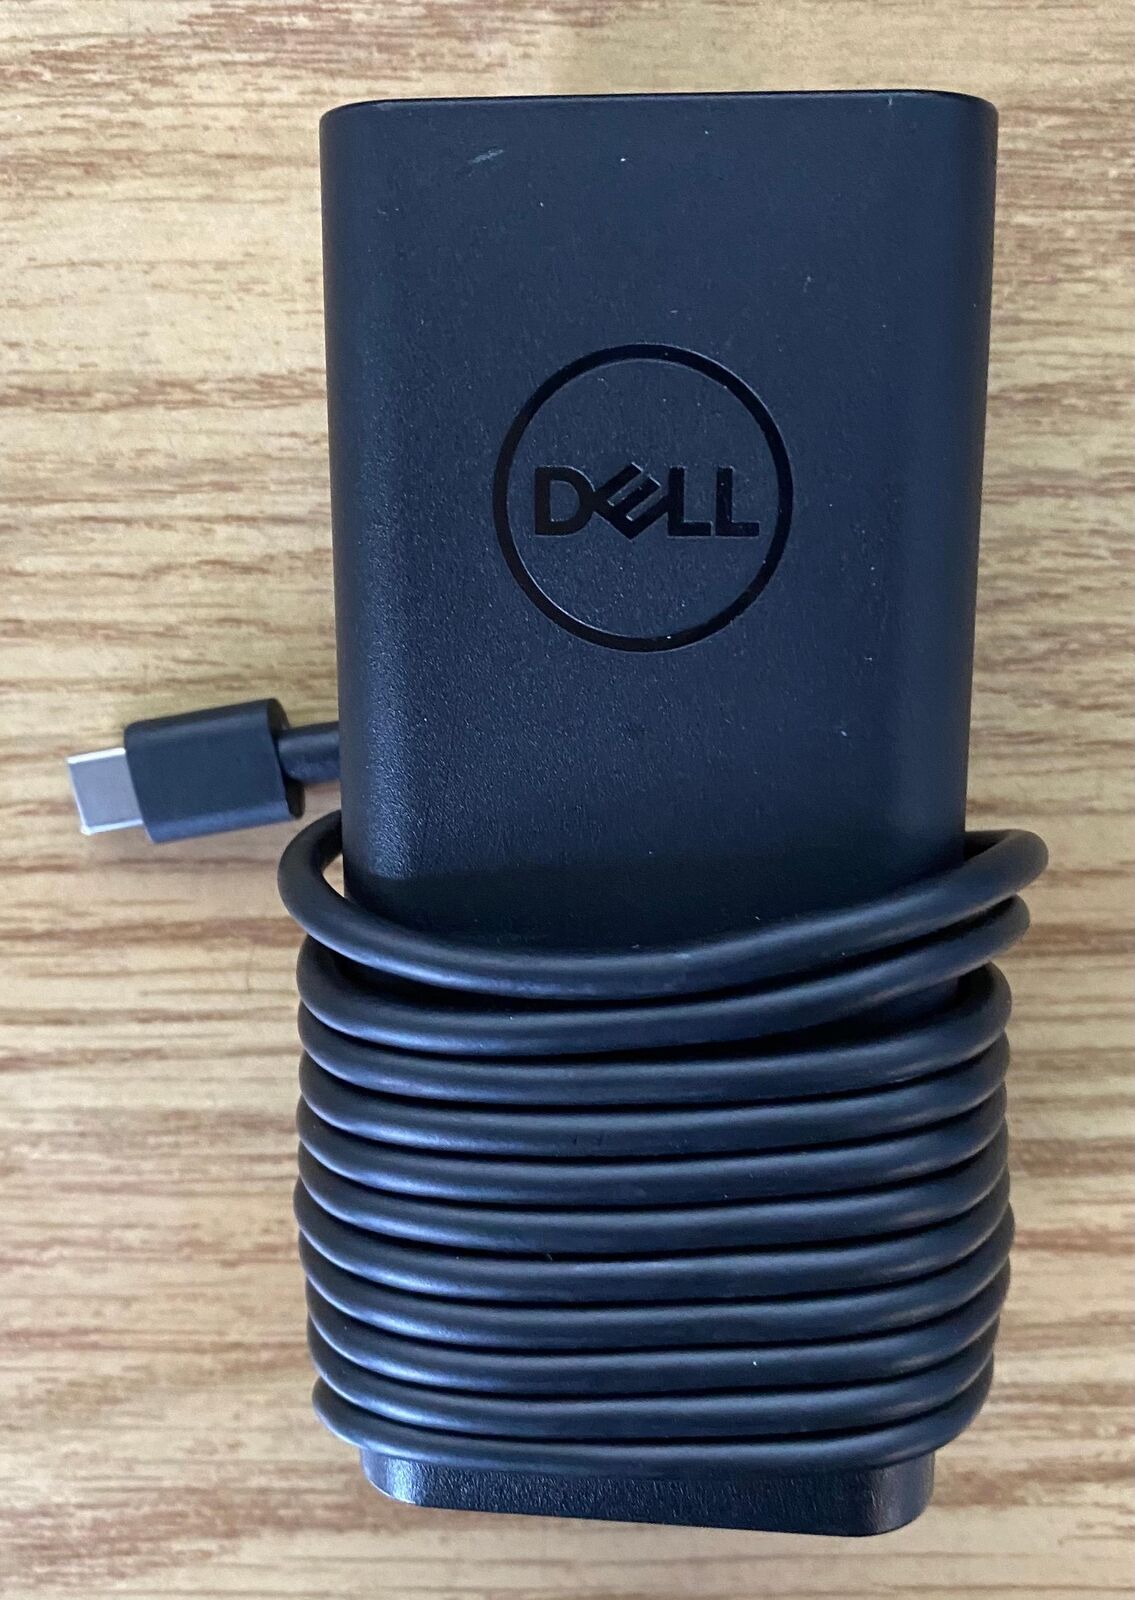 DELL Inspiron 16 7000 7630 P128F 65W Genuine Original AC Power Adapter Charger